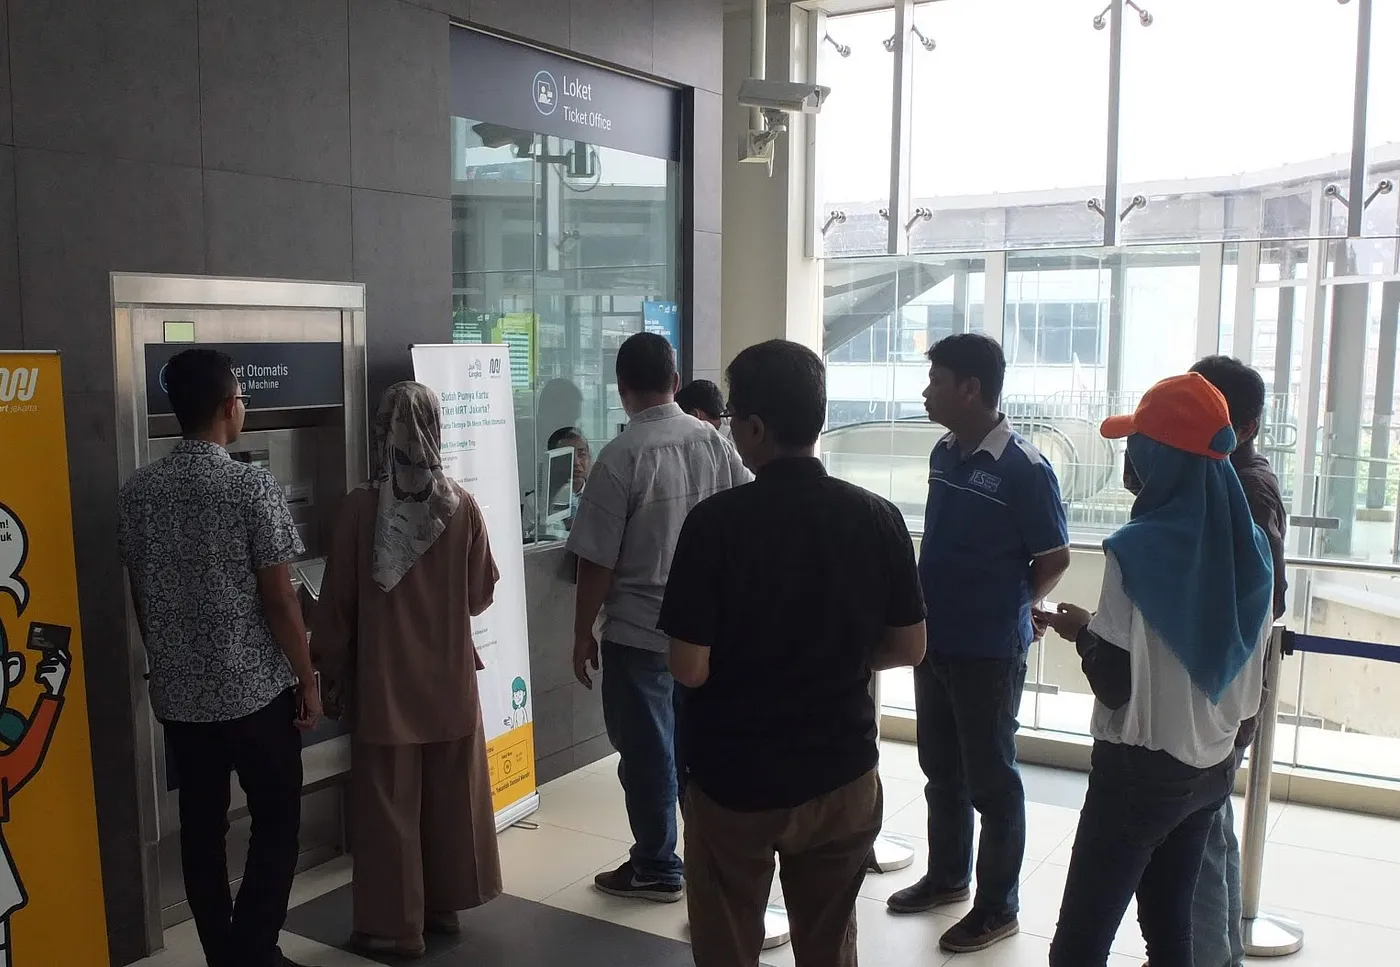 Group of 5 people queueing in locket while no one use the ticketing machine next to it